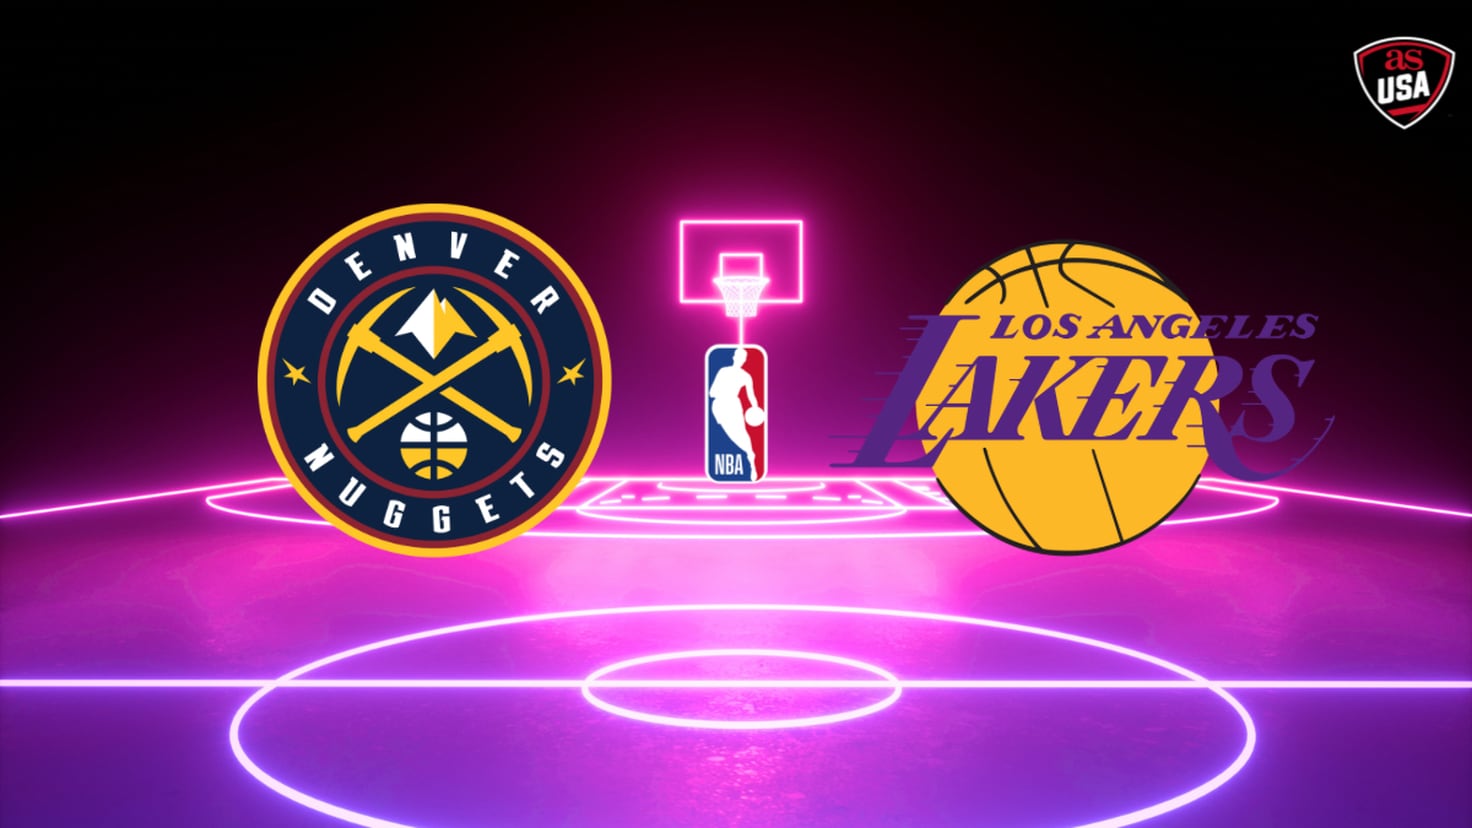 nba: LA Lakers vs Denver Nuggets NBA live streaming: Venue, start time,  where to watch, schedule - The Economic Times